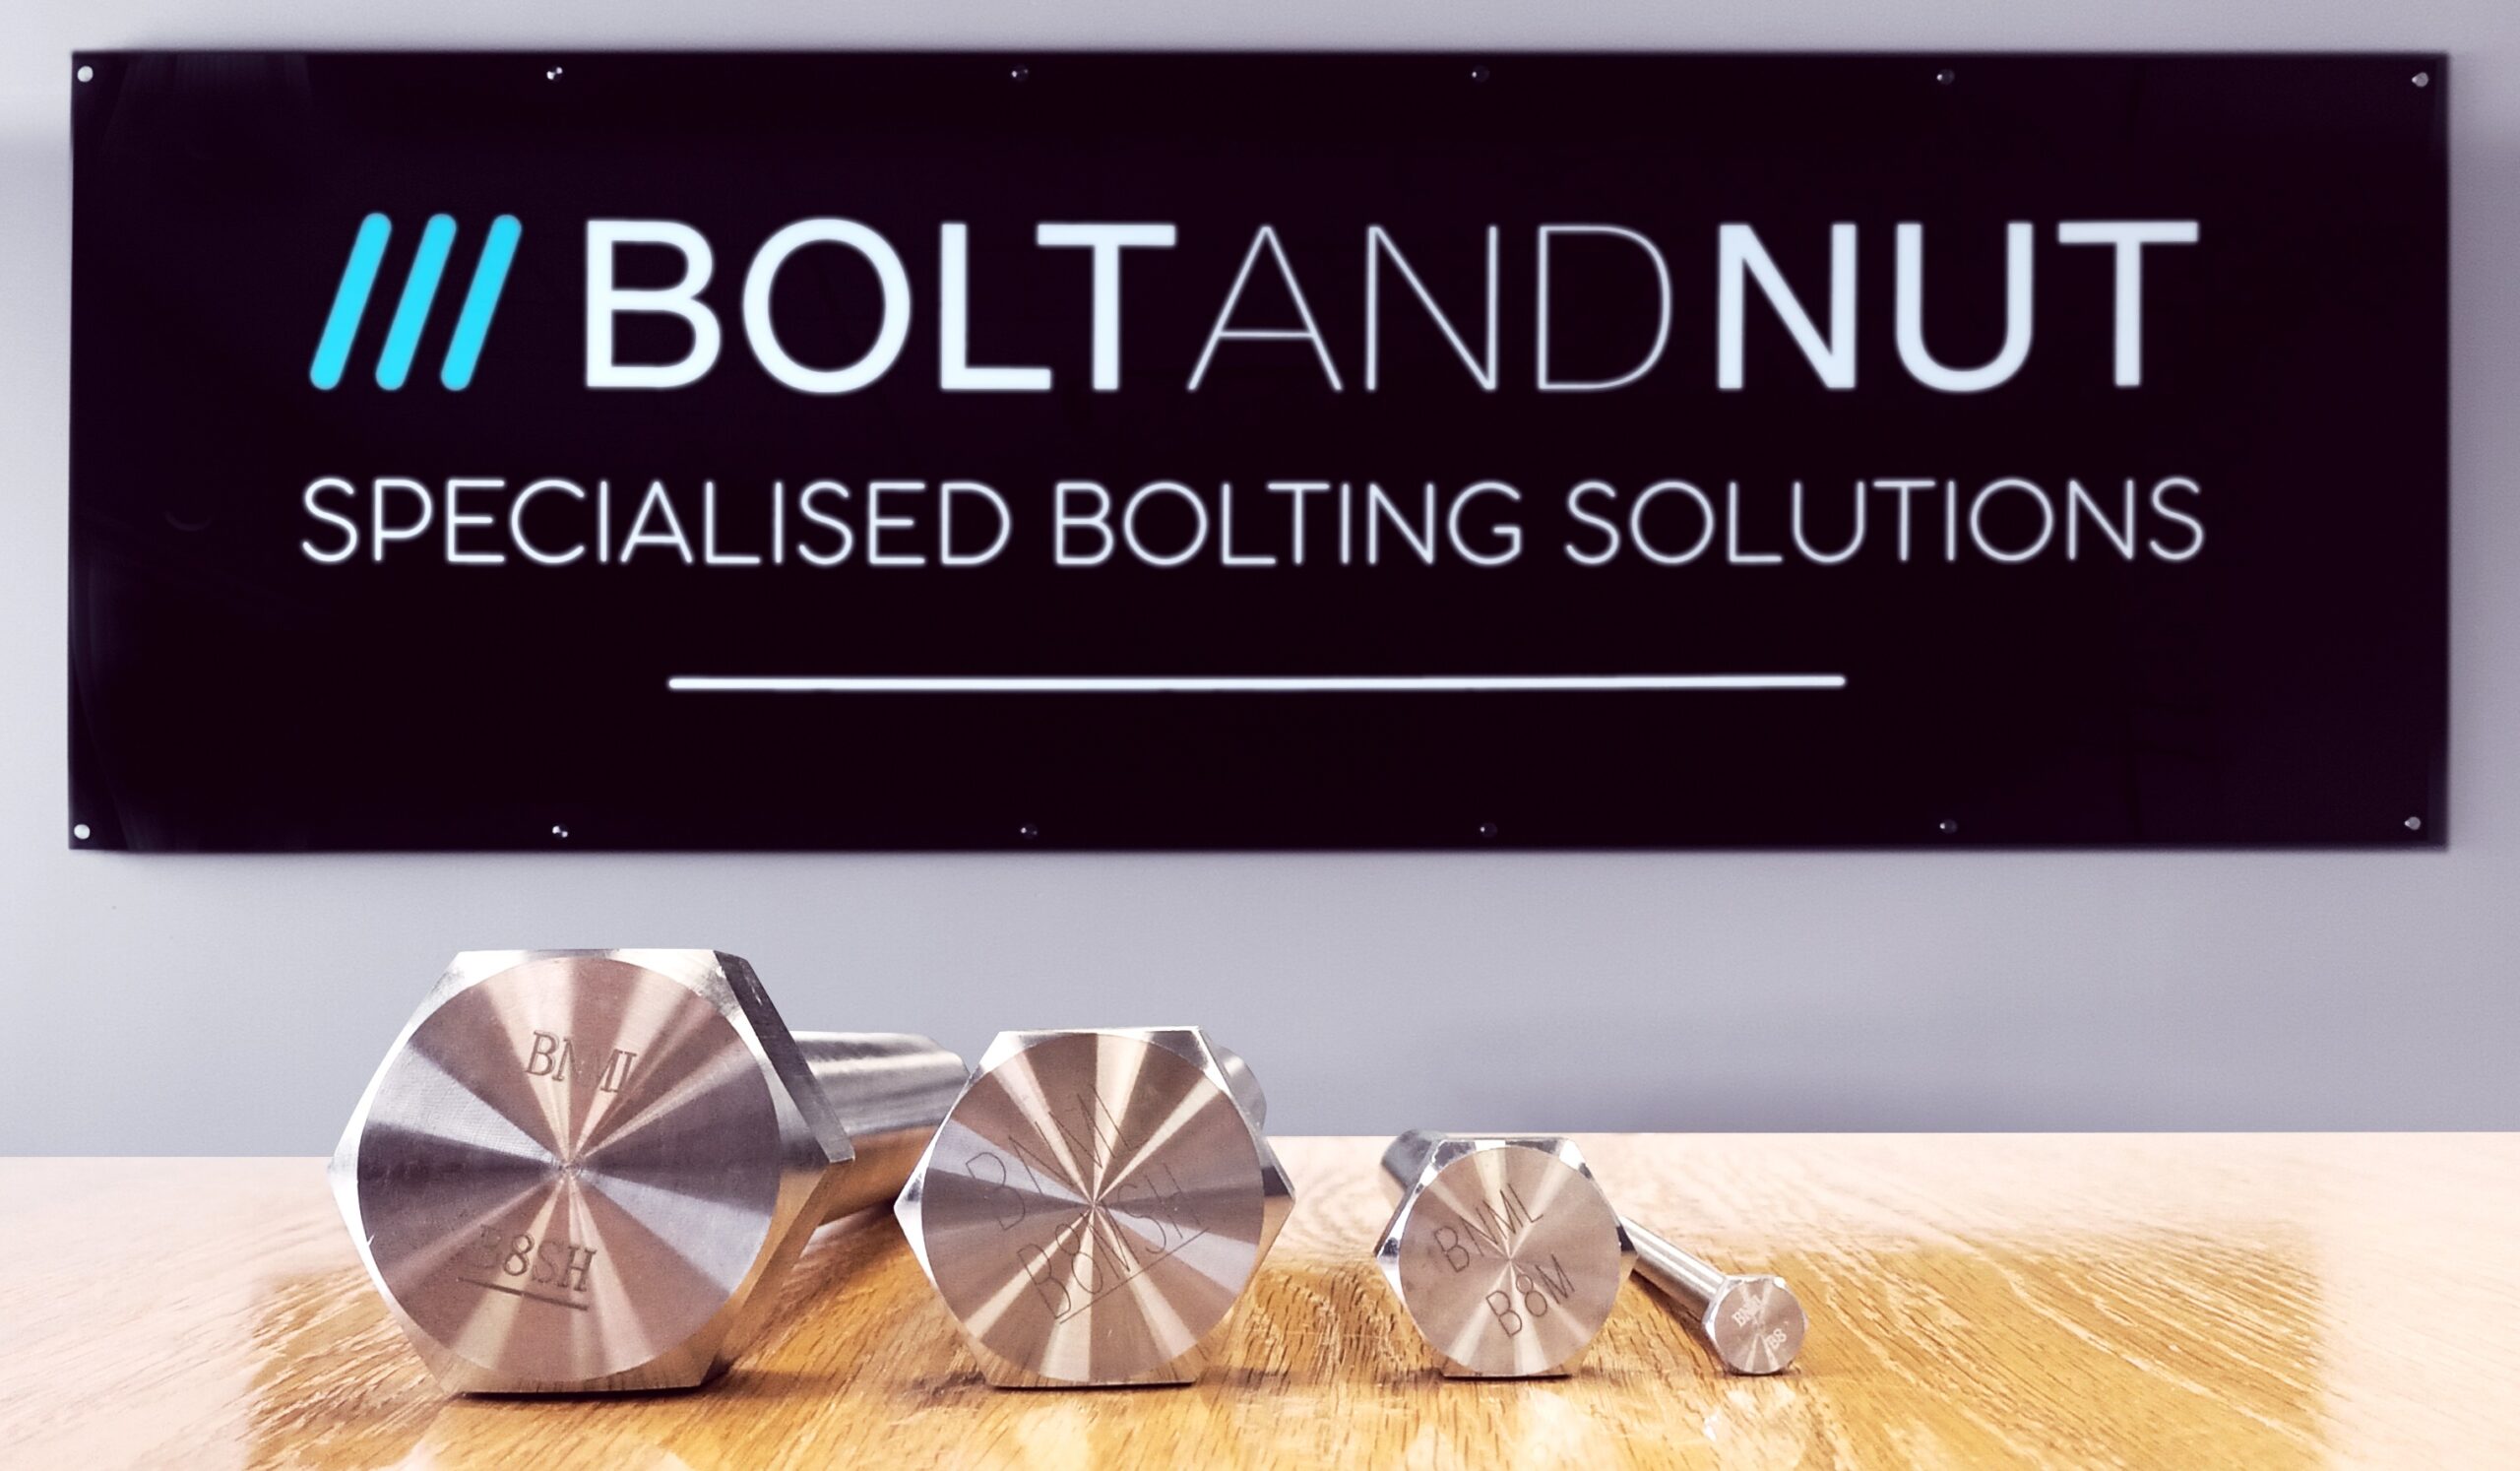 Six of the best with Bolt and Nut’s new stock range